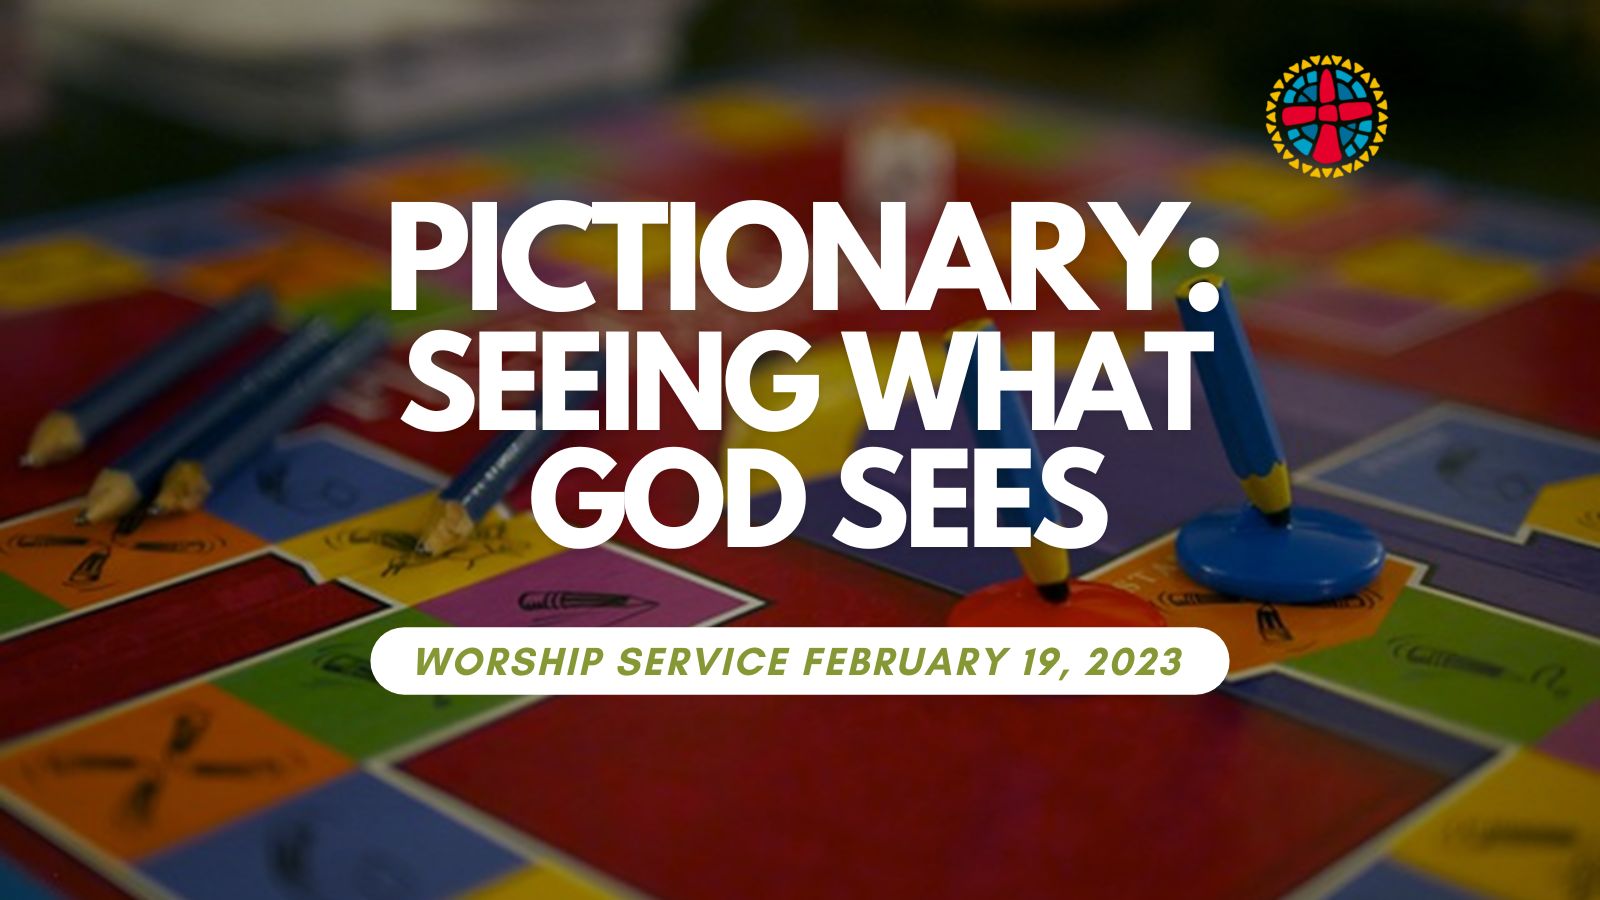 Worship Service February 19, 2023 Pictionary Seeing What God Sees